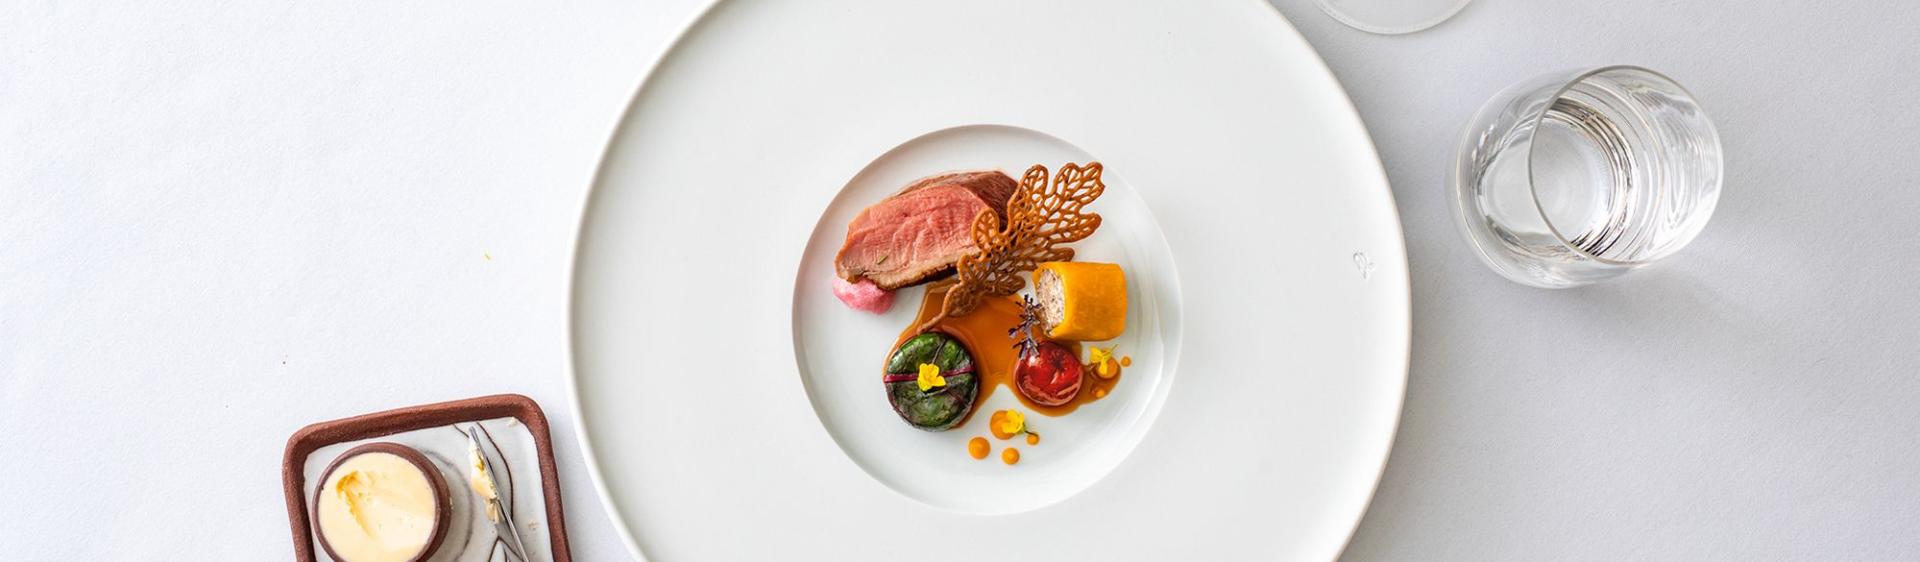 How Michelin Stars Are Awarded to Restaurants